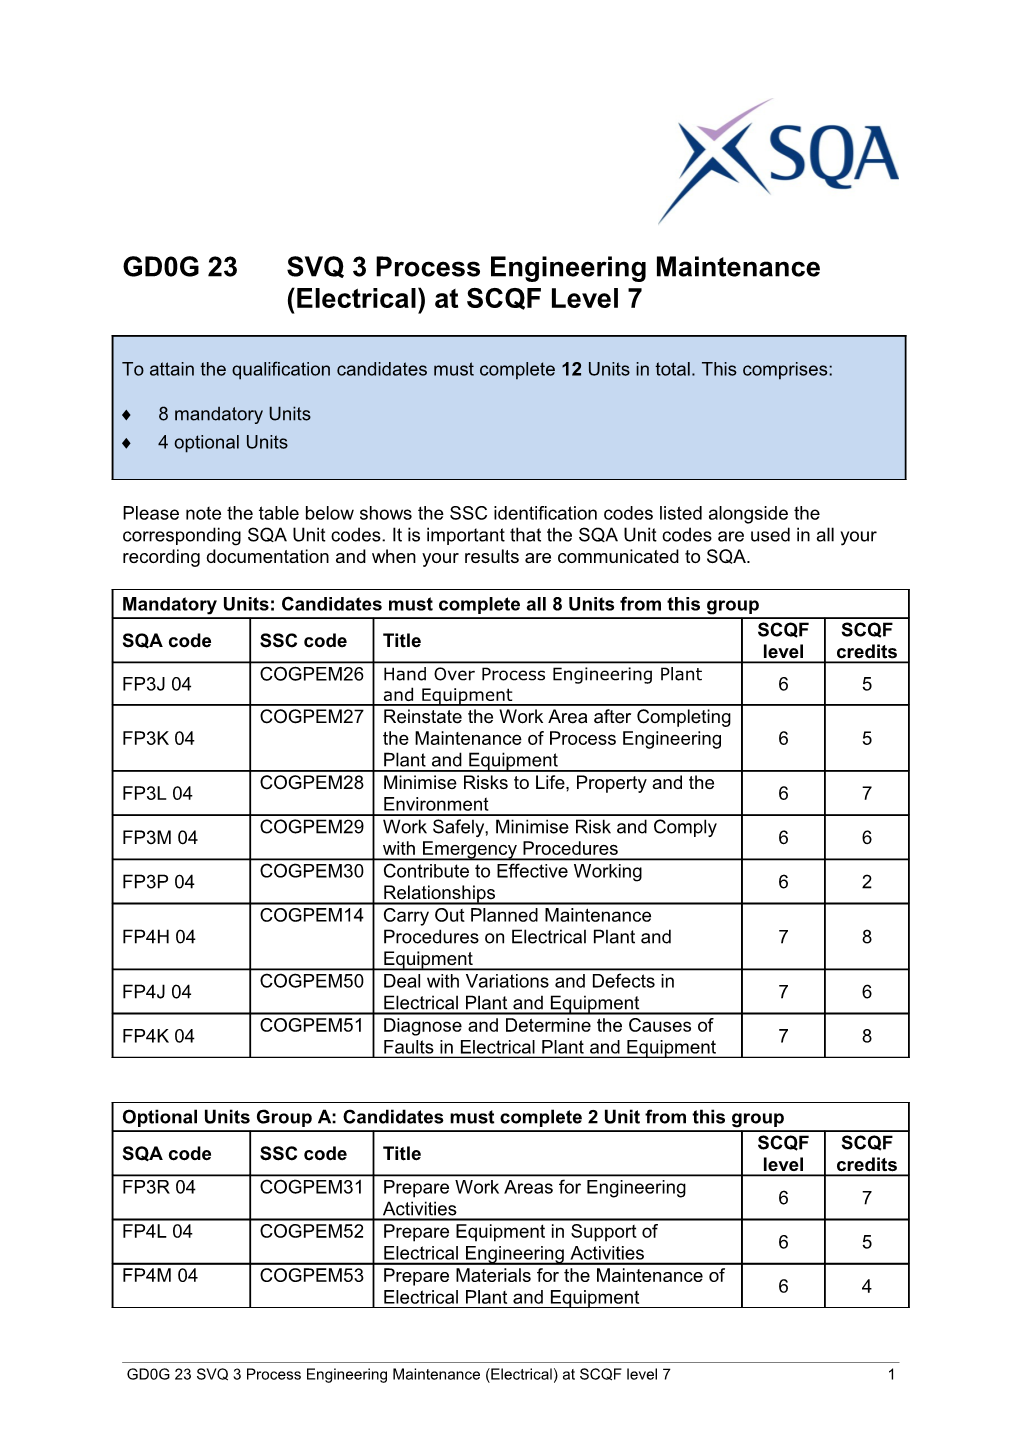 GD0G 23 SVQ 3Process Engineering Maintenance (Electrical)At SCQF Level 71